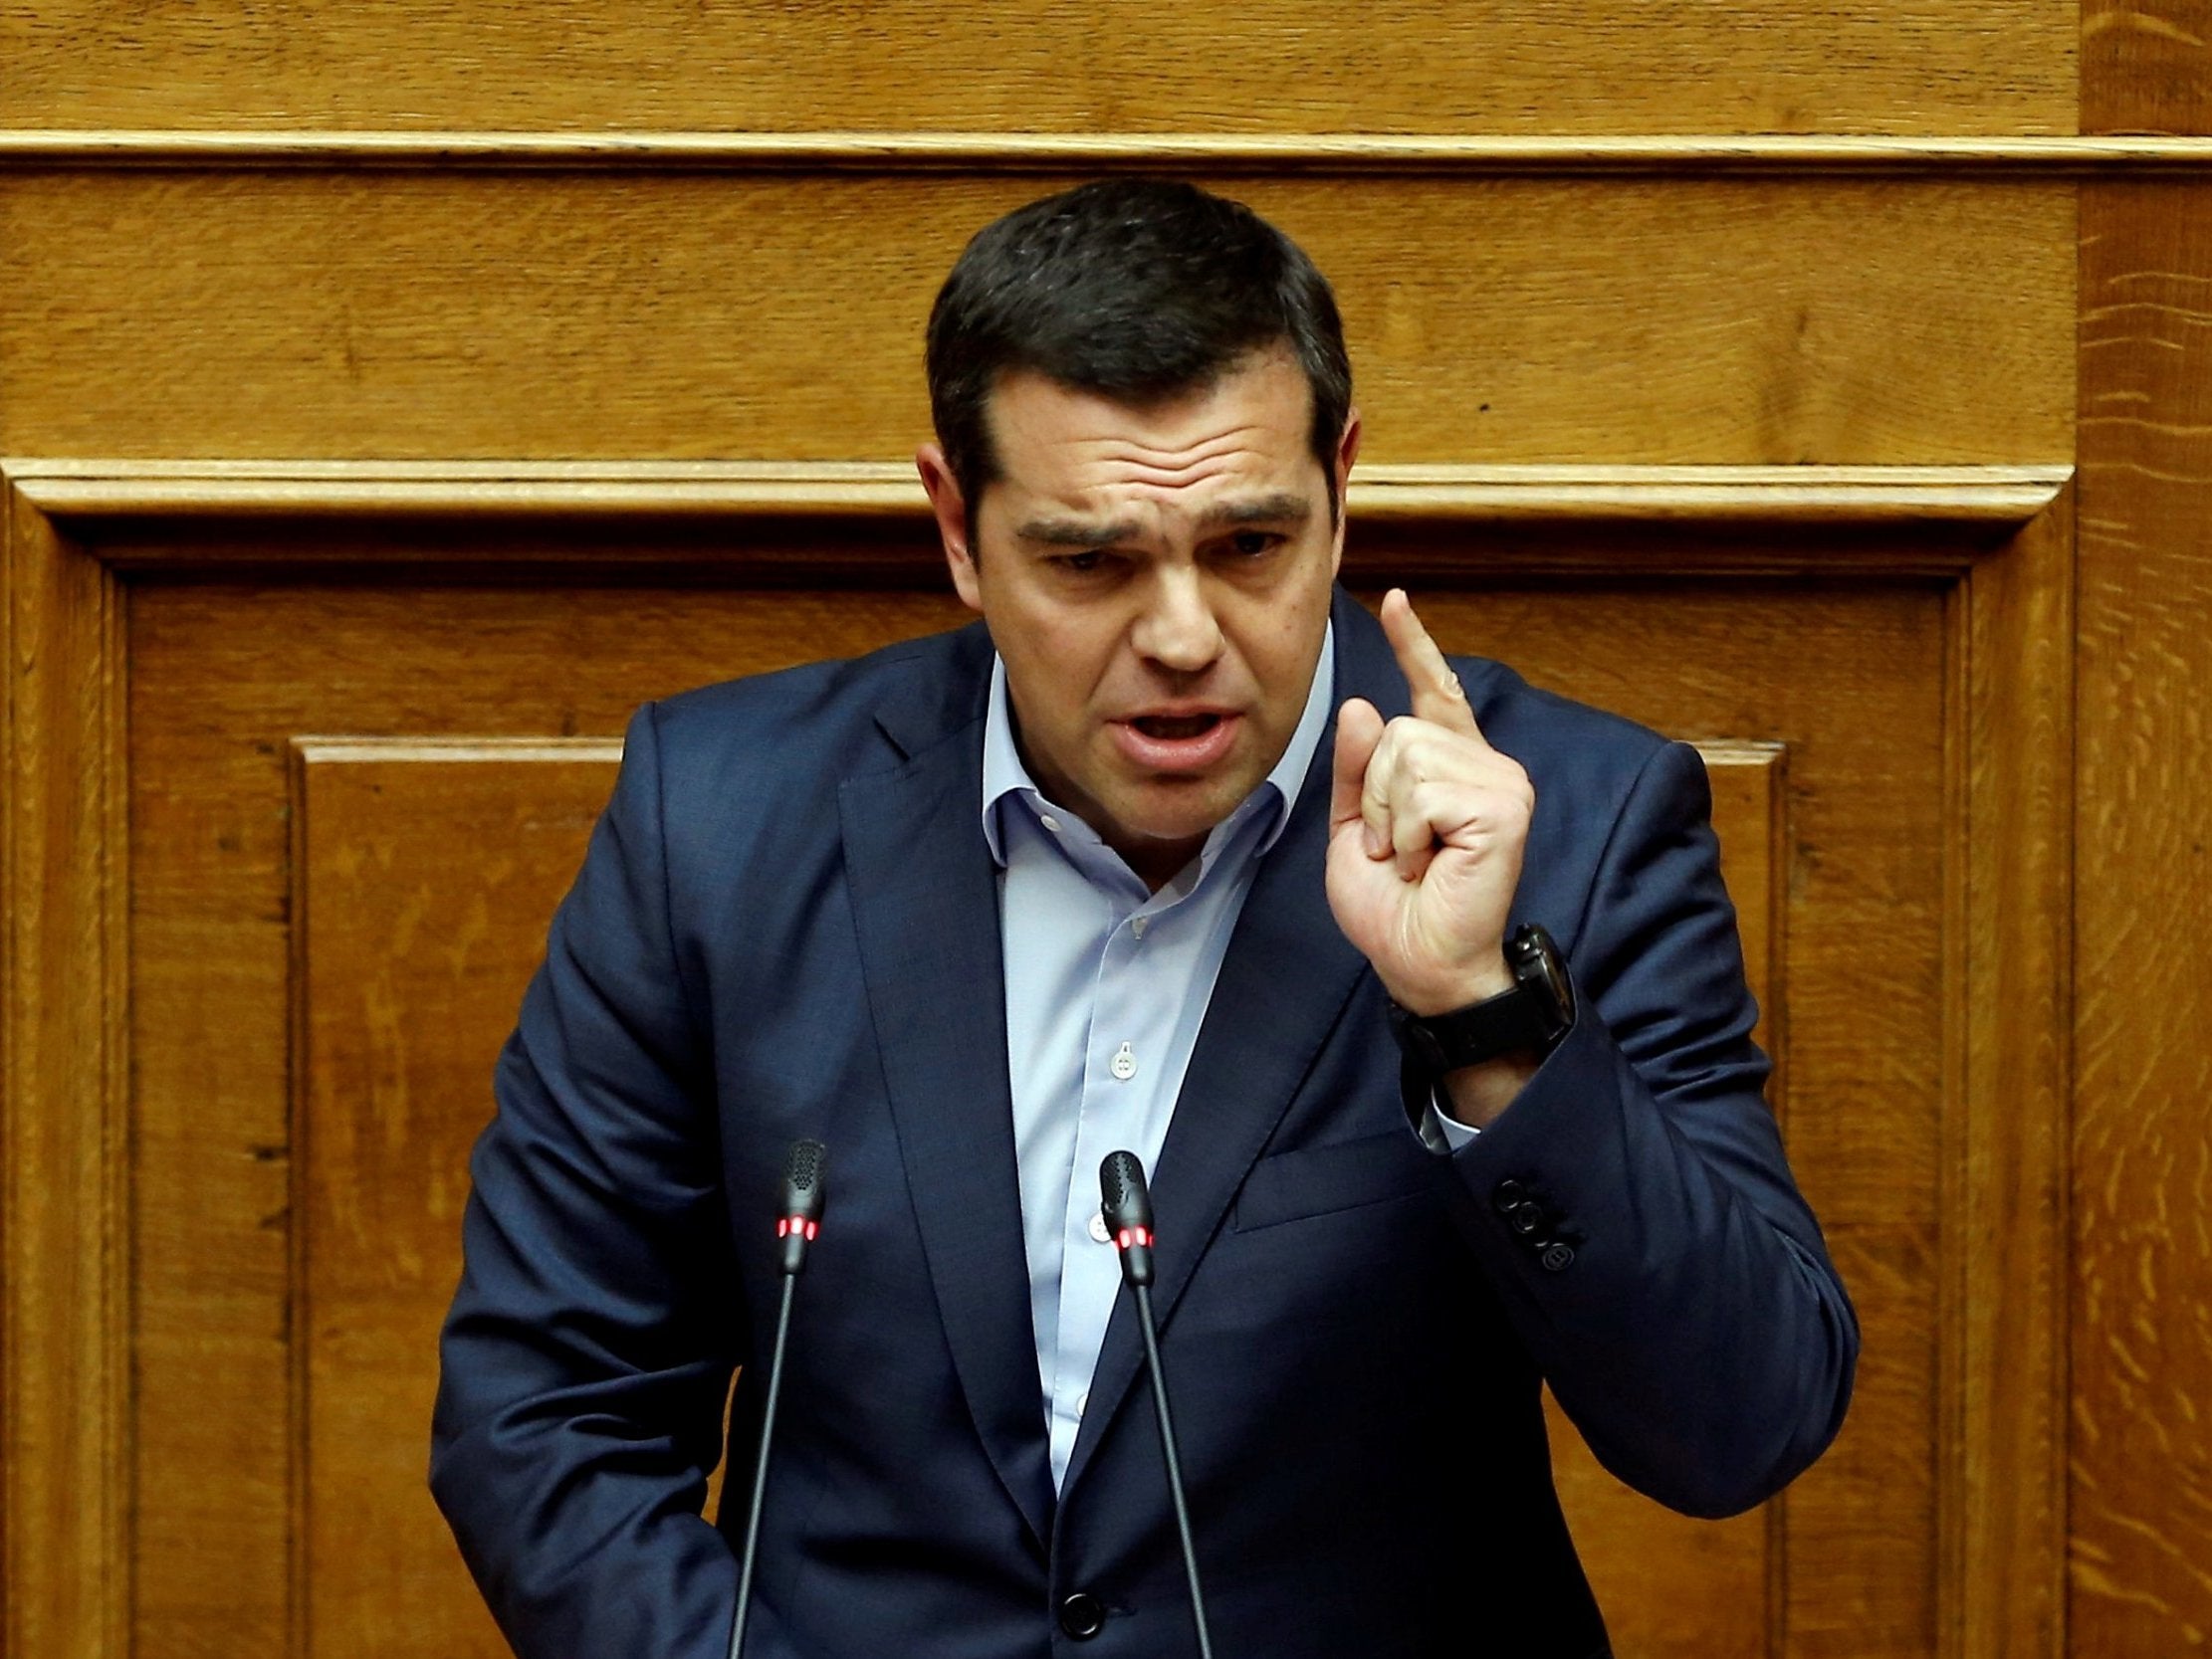 Alexis Tsipras addresses lawmakers before a vote on reparations